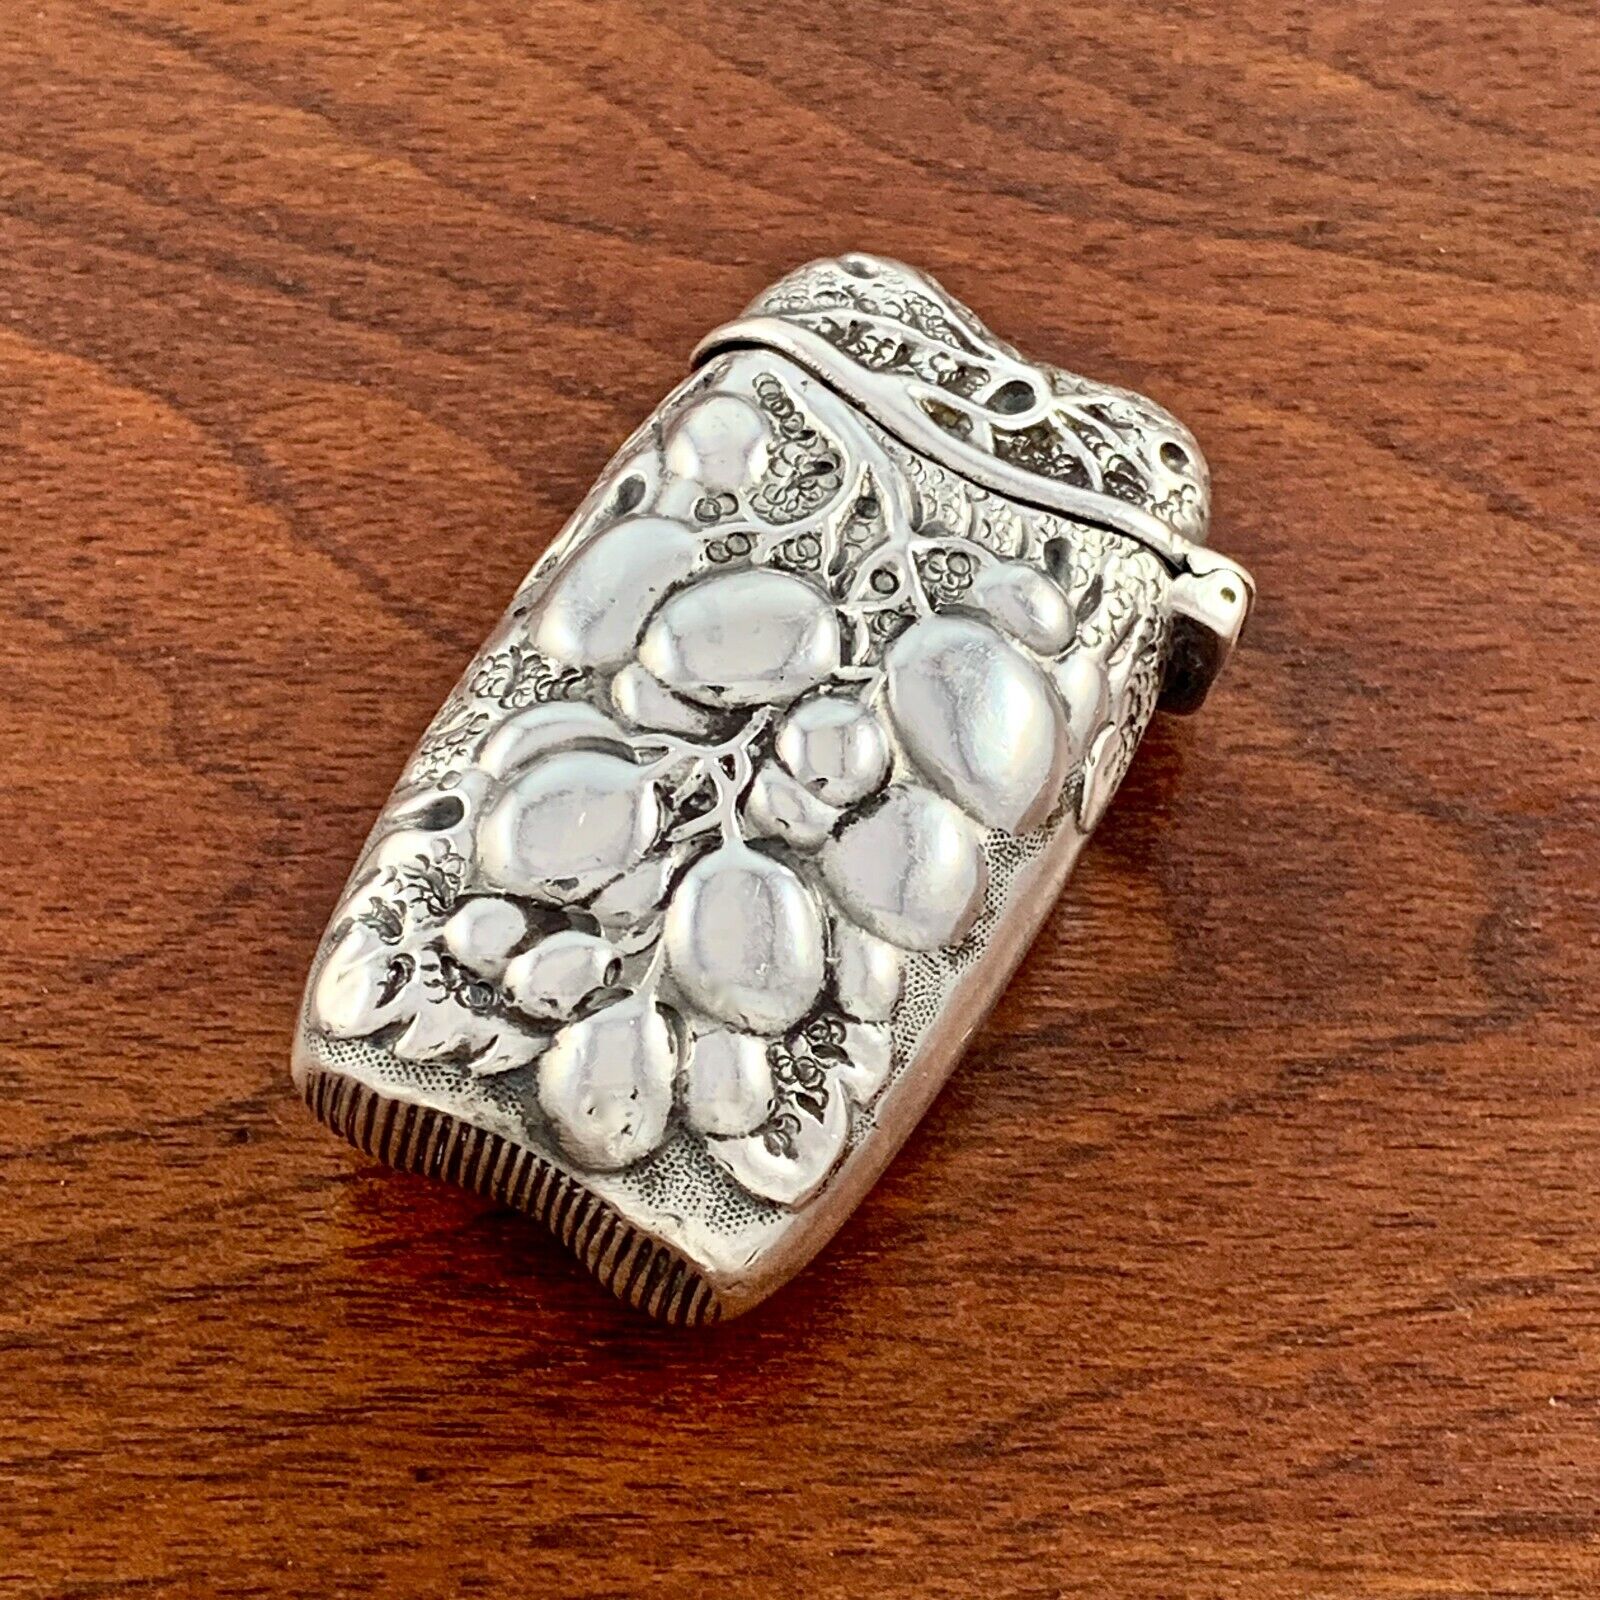 WHITING AESTHETIC STERLING SILVER MATCH SAFE BERRY PATTERN CHOKE CHERRY 1880